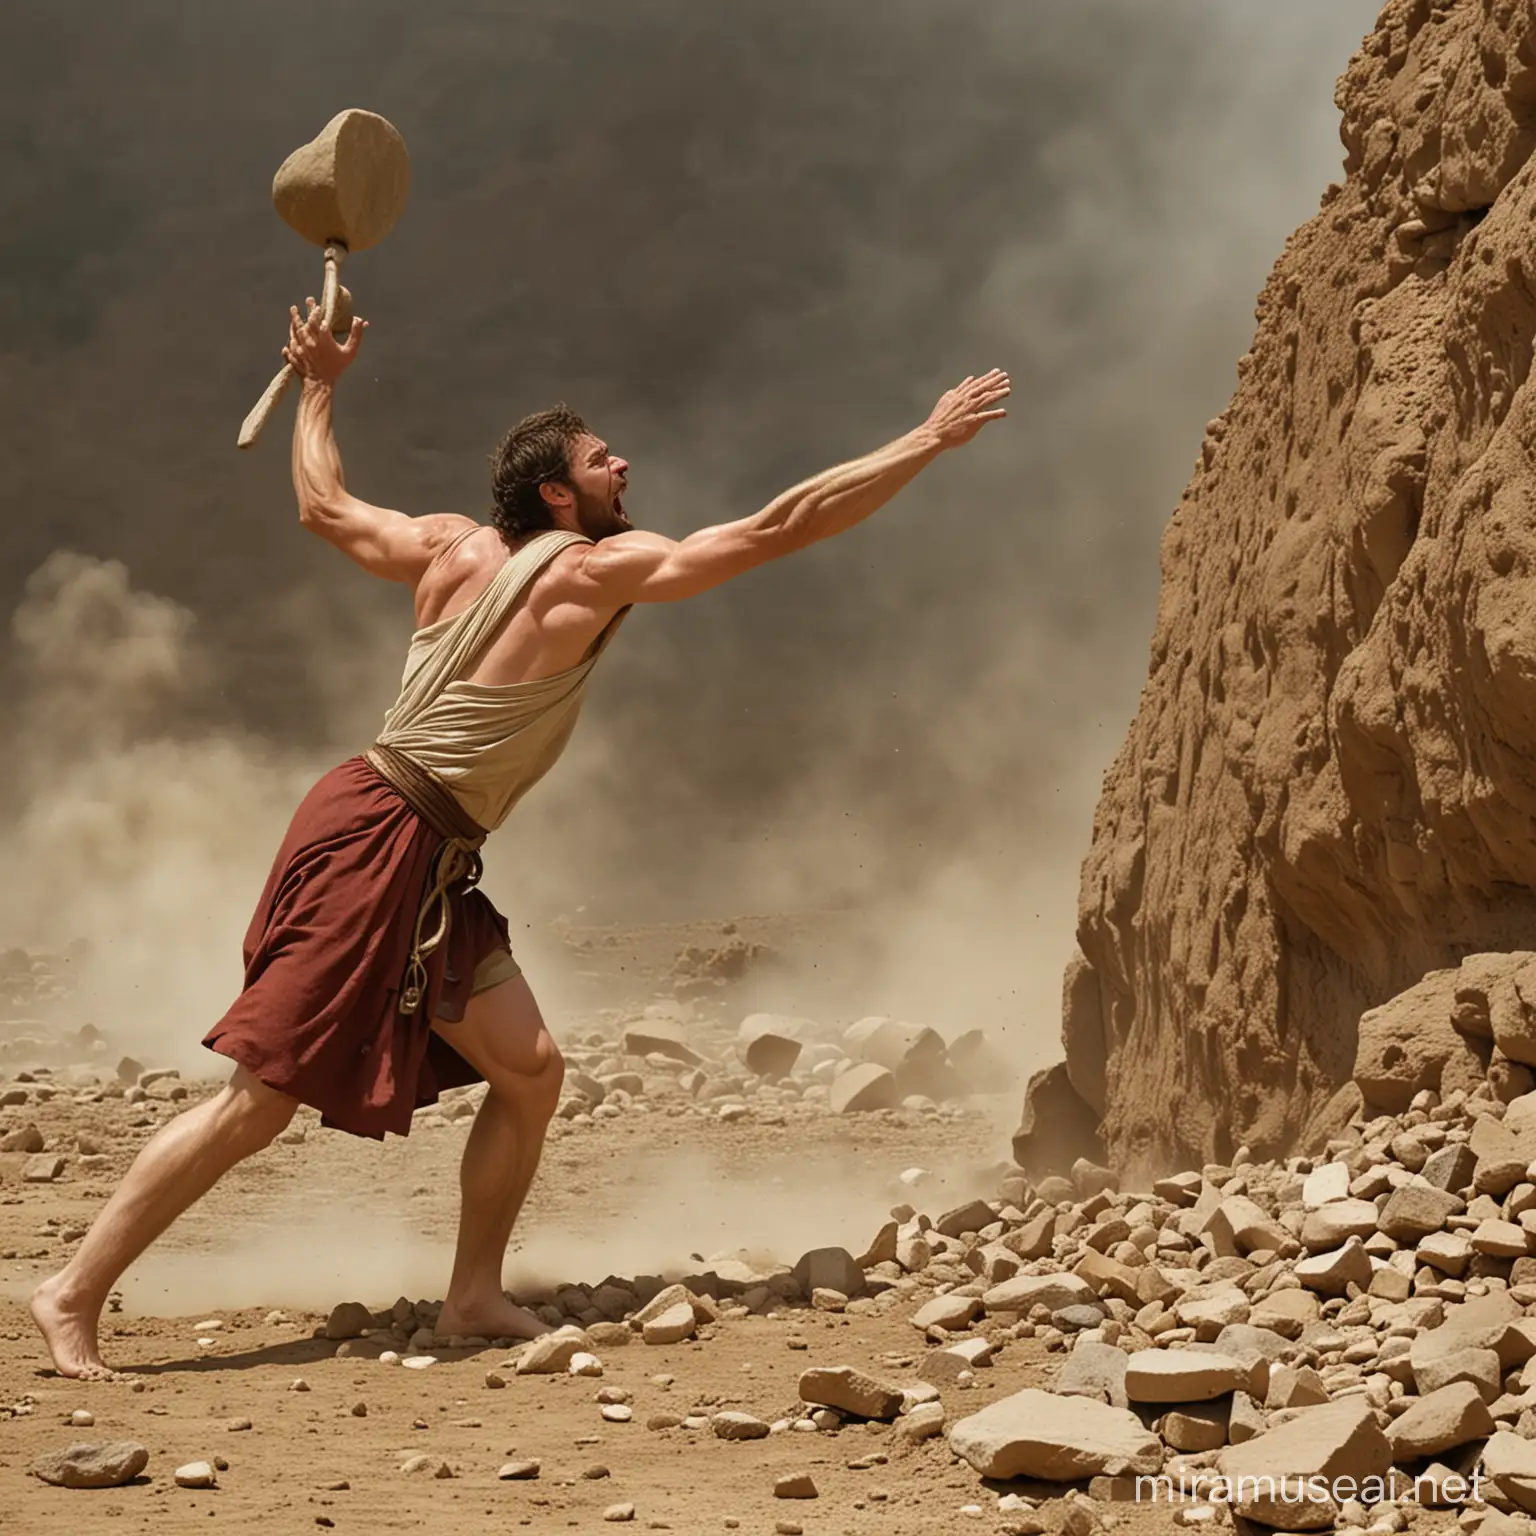 The Fatal Blow: Show the climactic moment when David, with a steady hand and unwavering faith, releases the sling, sending the stone hurtling towards Goliath, who reels back in shock as the projectile finds its mark.